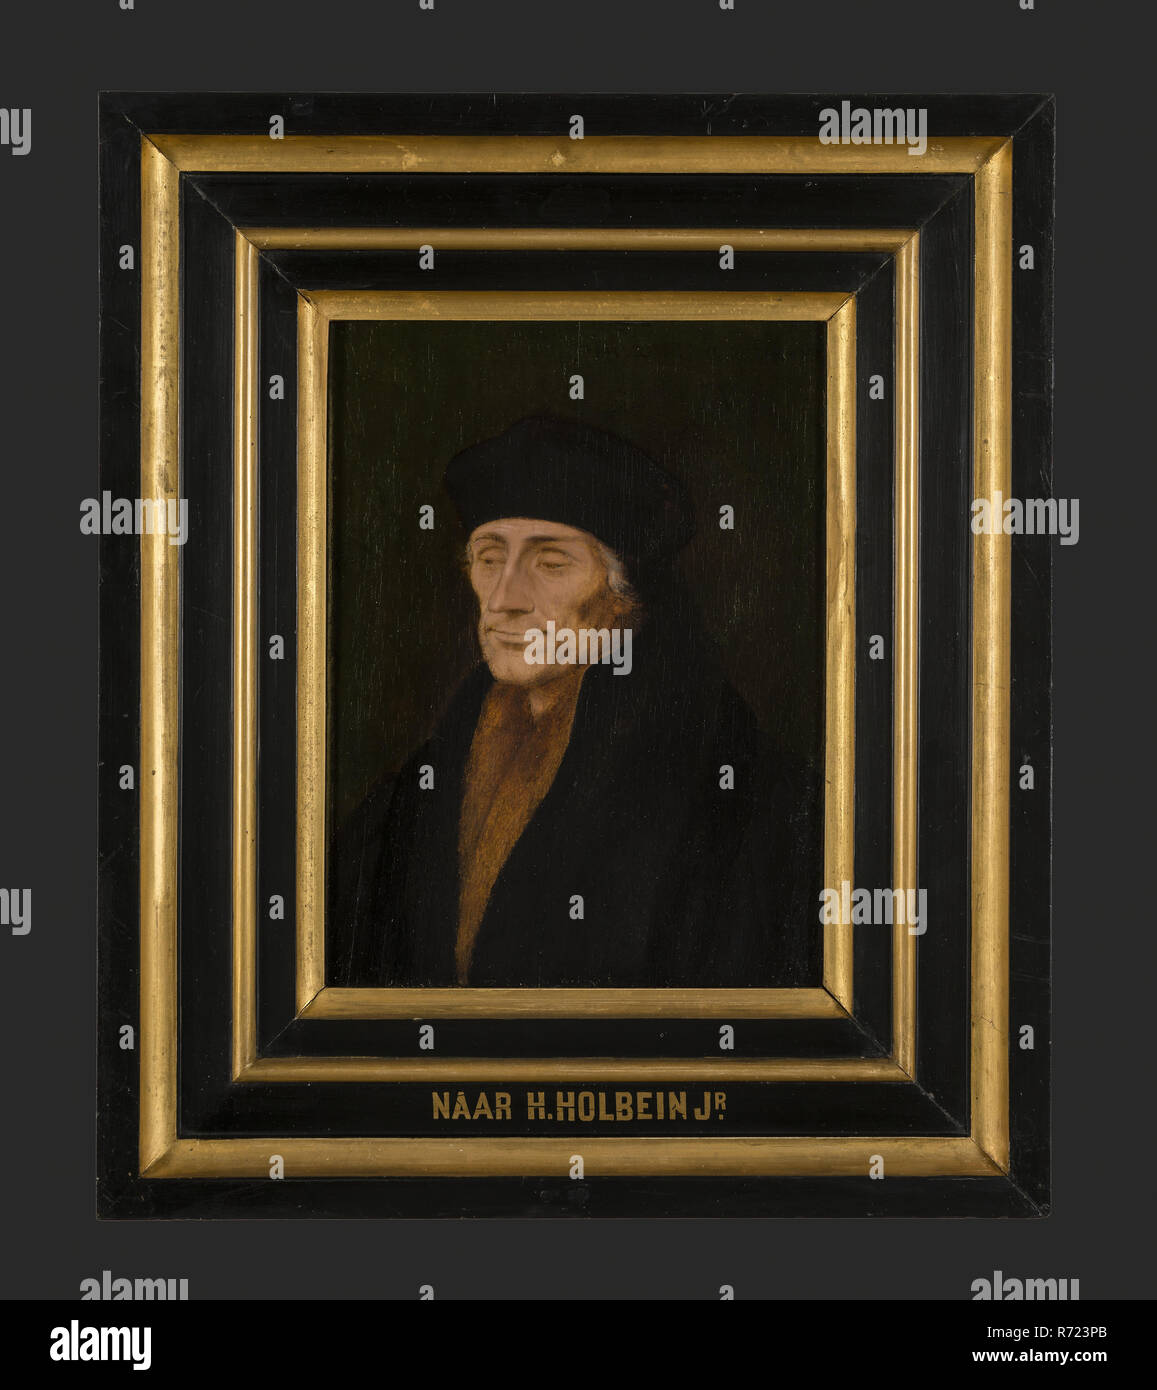 after: Hans Holbein de Jonge, Portrait of Desiderius Erasmus, portrait painting footage wood oil panel, Portrait rectangular portrait of man representing Desiderius Erasmus (1467? -1536) From left seen not seen Baret gown with fur edge upper right: Image (. ..) Roterodam AD (false signature Alwecht Dürer) Rotterdam Erasmus humanist Hans Holbein According to old tradition (but not sustainable at the moment) as gift from the city of Basel to Rotterdam in 1532. It is certain that it is from the old town hall on the Kaasmarkt in 1849 has been transferred to Museum Boymans. Stock Photo